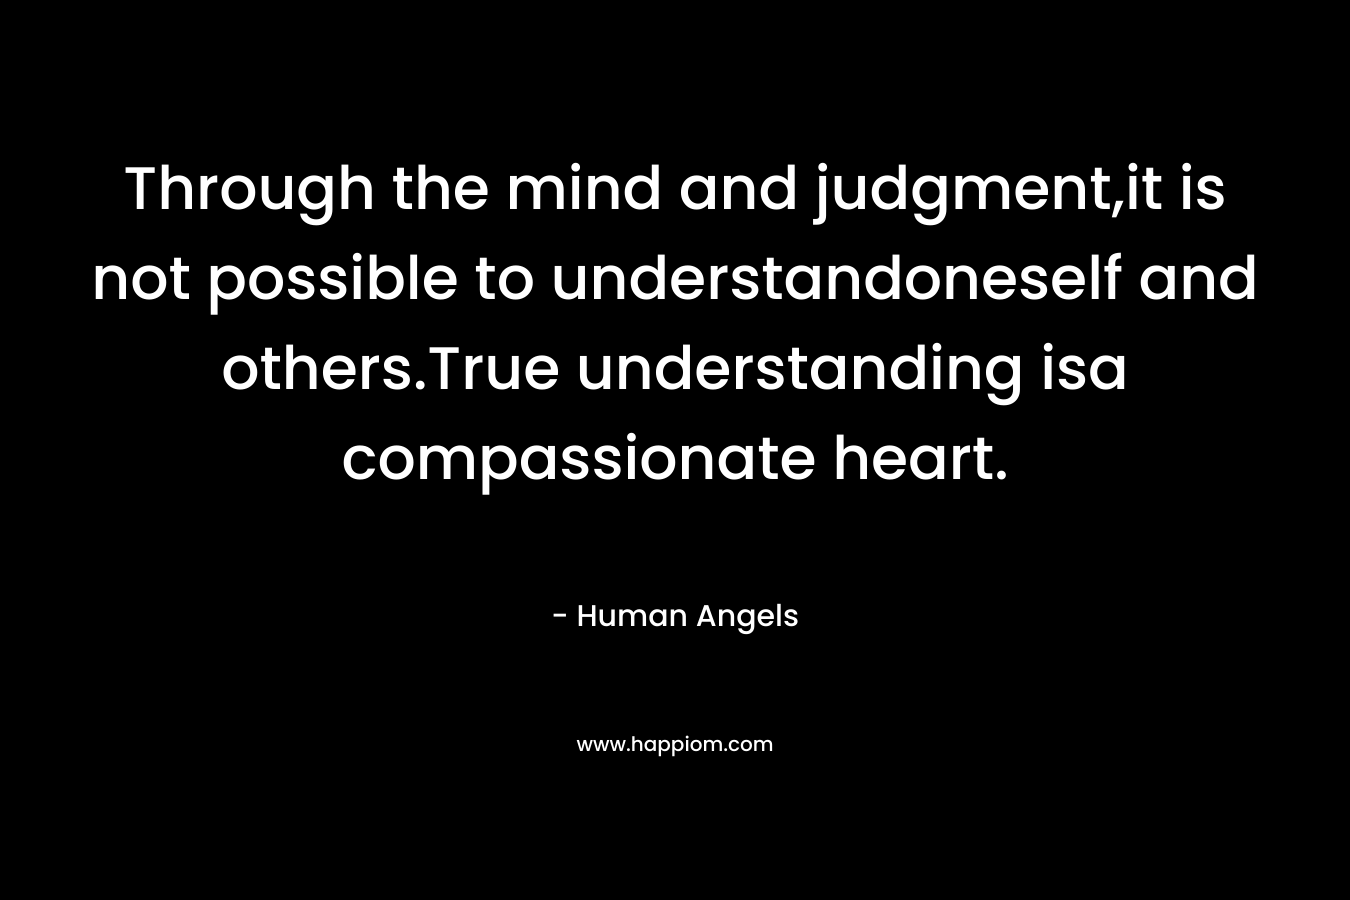 Through the mind and judgment,it is not possible to understandoneself and others.True understanding isa compassionate heart.